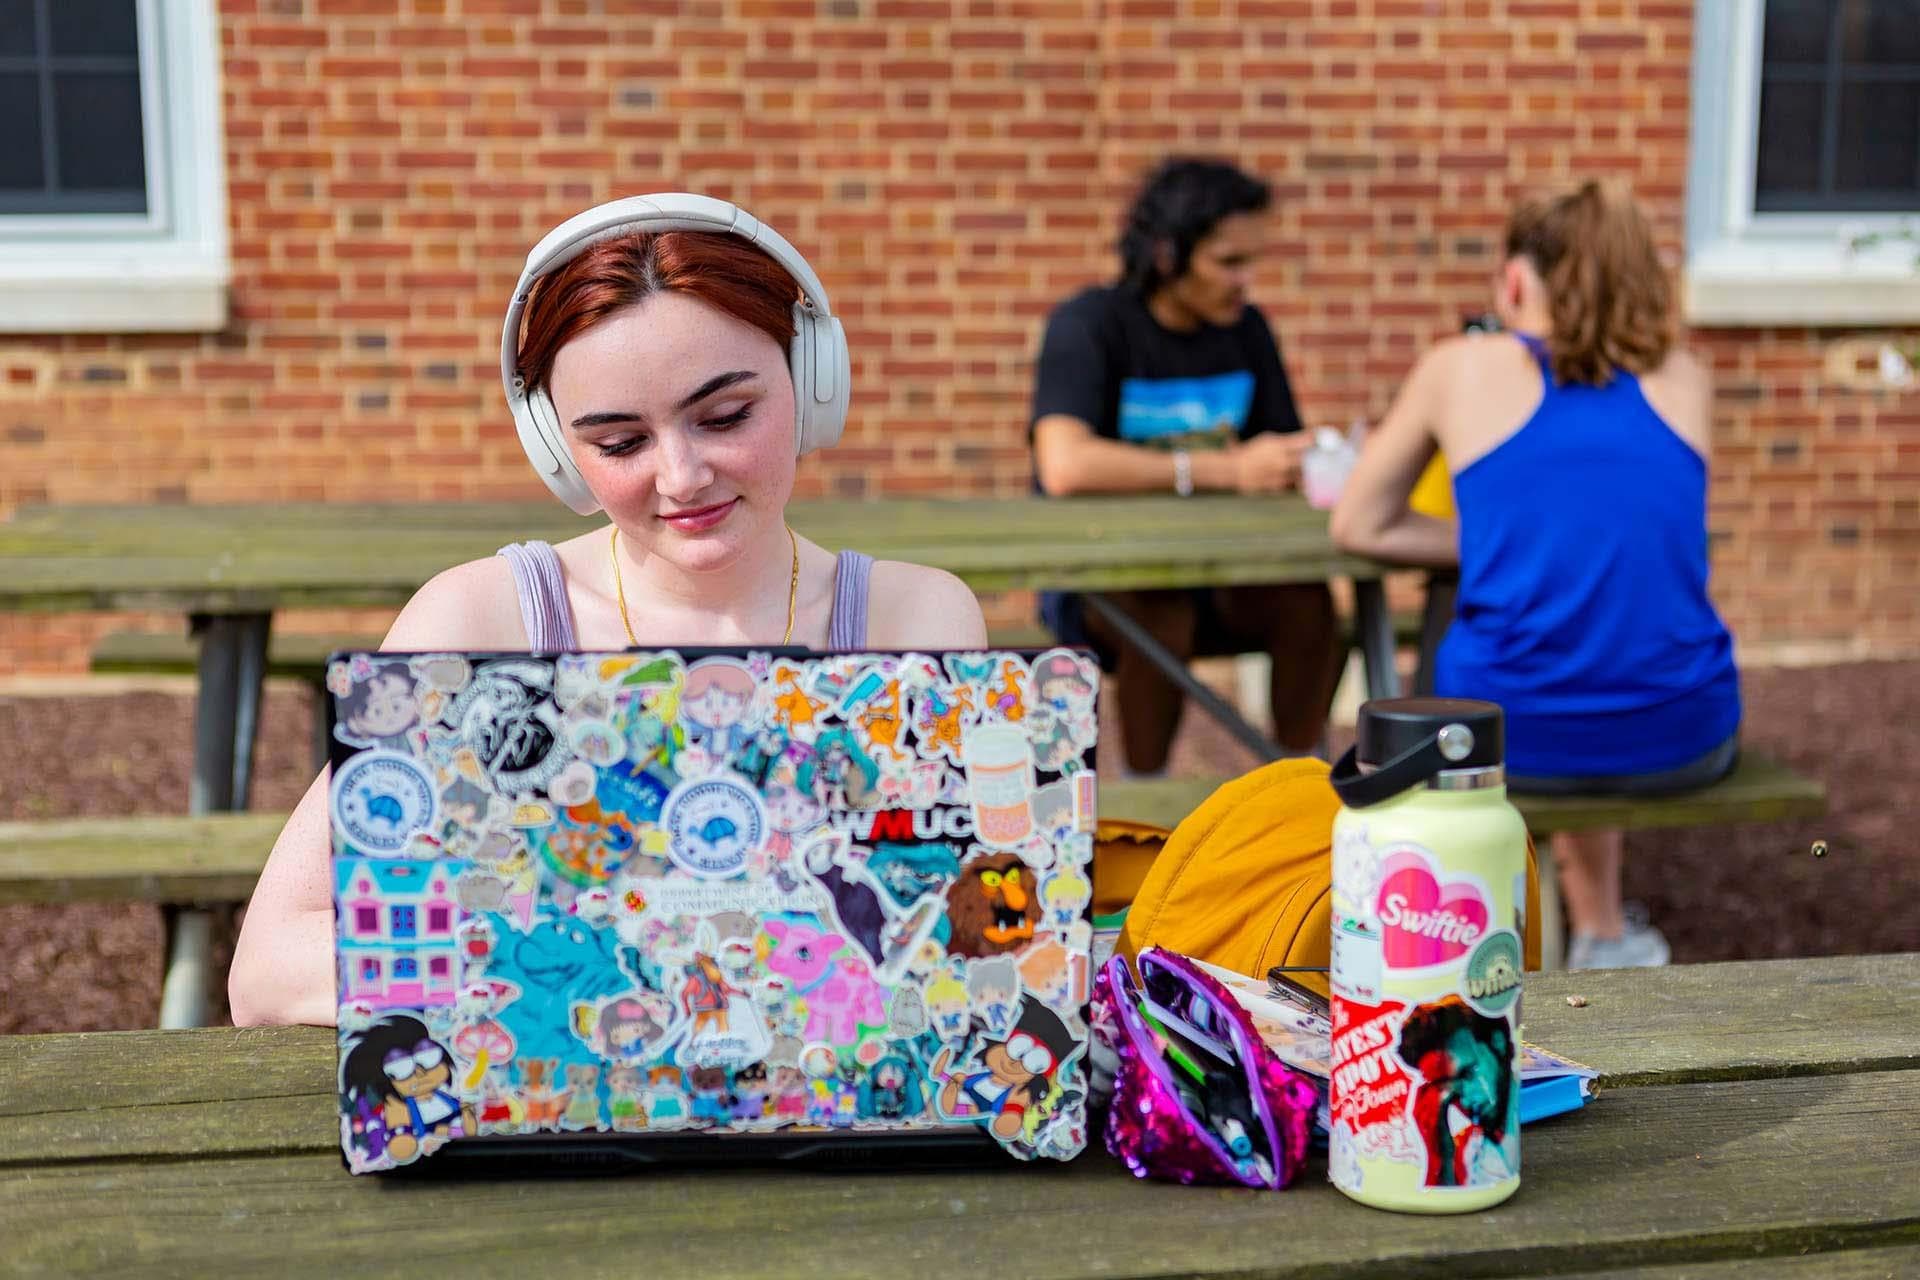 student wears white headphones and works on laptop covered with stickers while sitting at picnic table